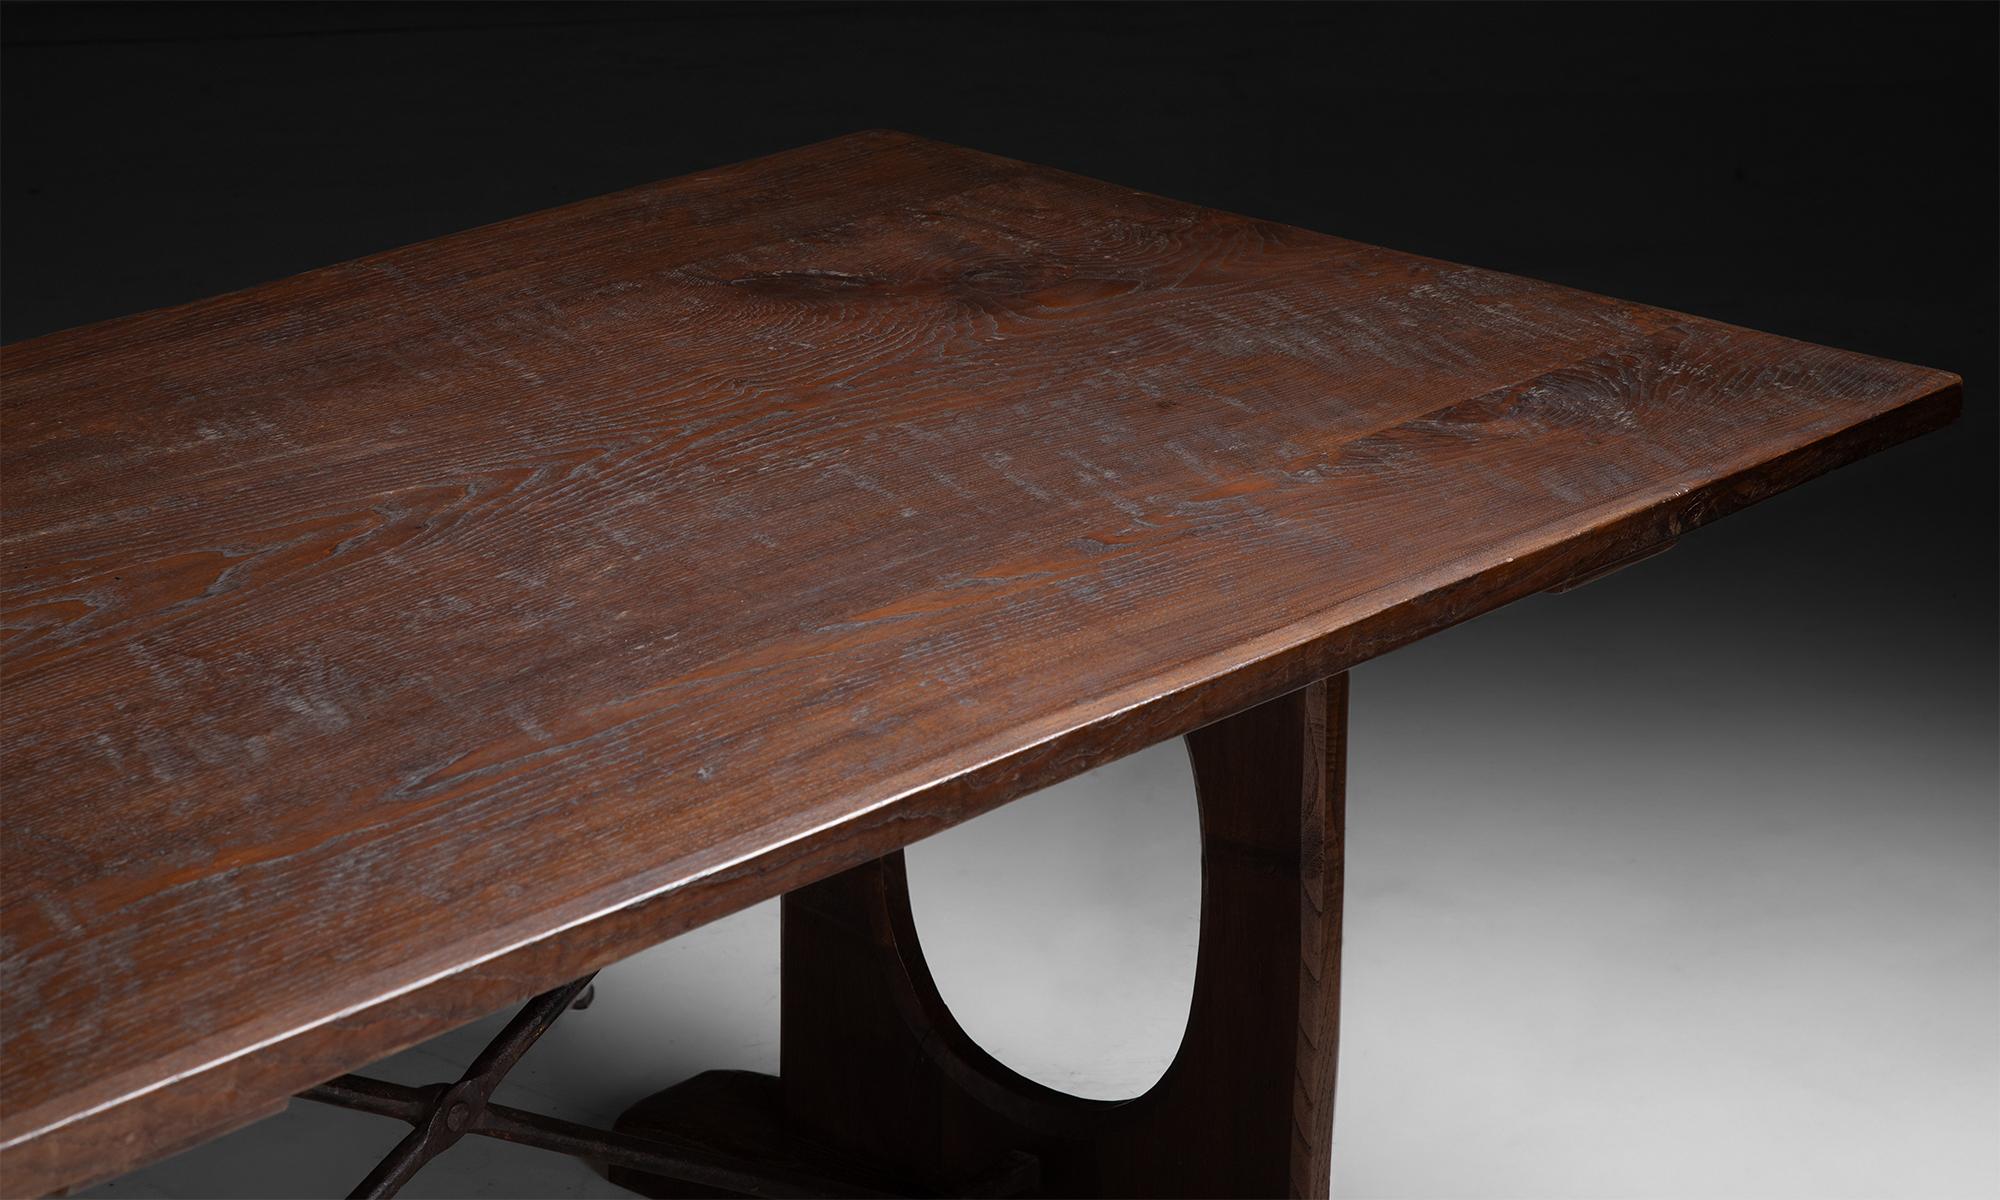 Chestnut X-Frame Table

Spain circa 1960

Hand adzed chestnut tabletop on open oval ends with hand forged ‘x’ frame stretcher.

72.75”L x 39”d x 29.25”h